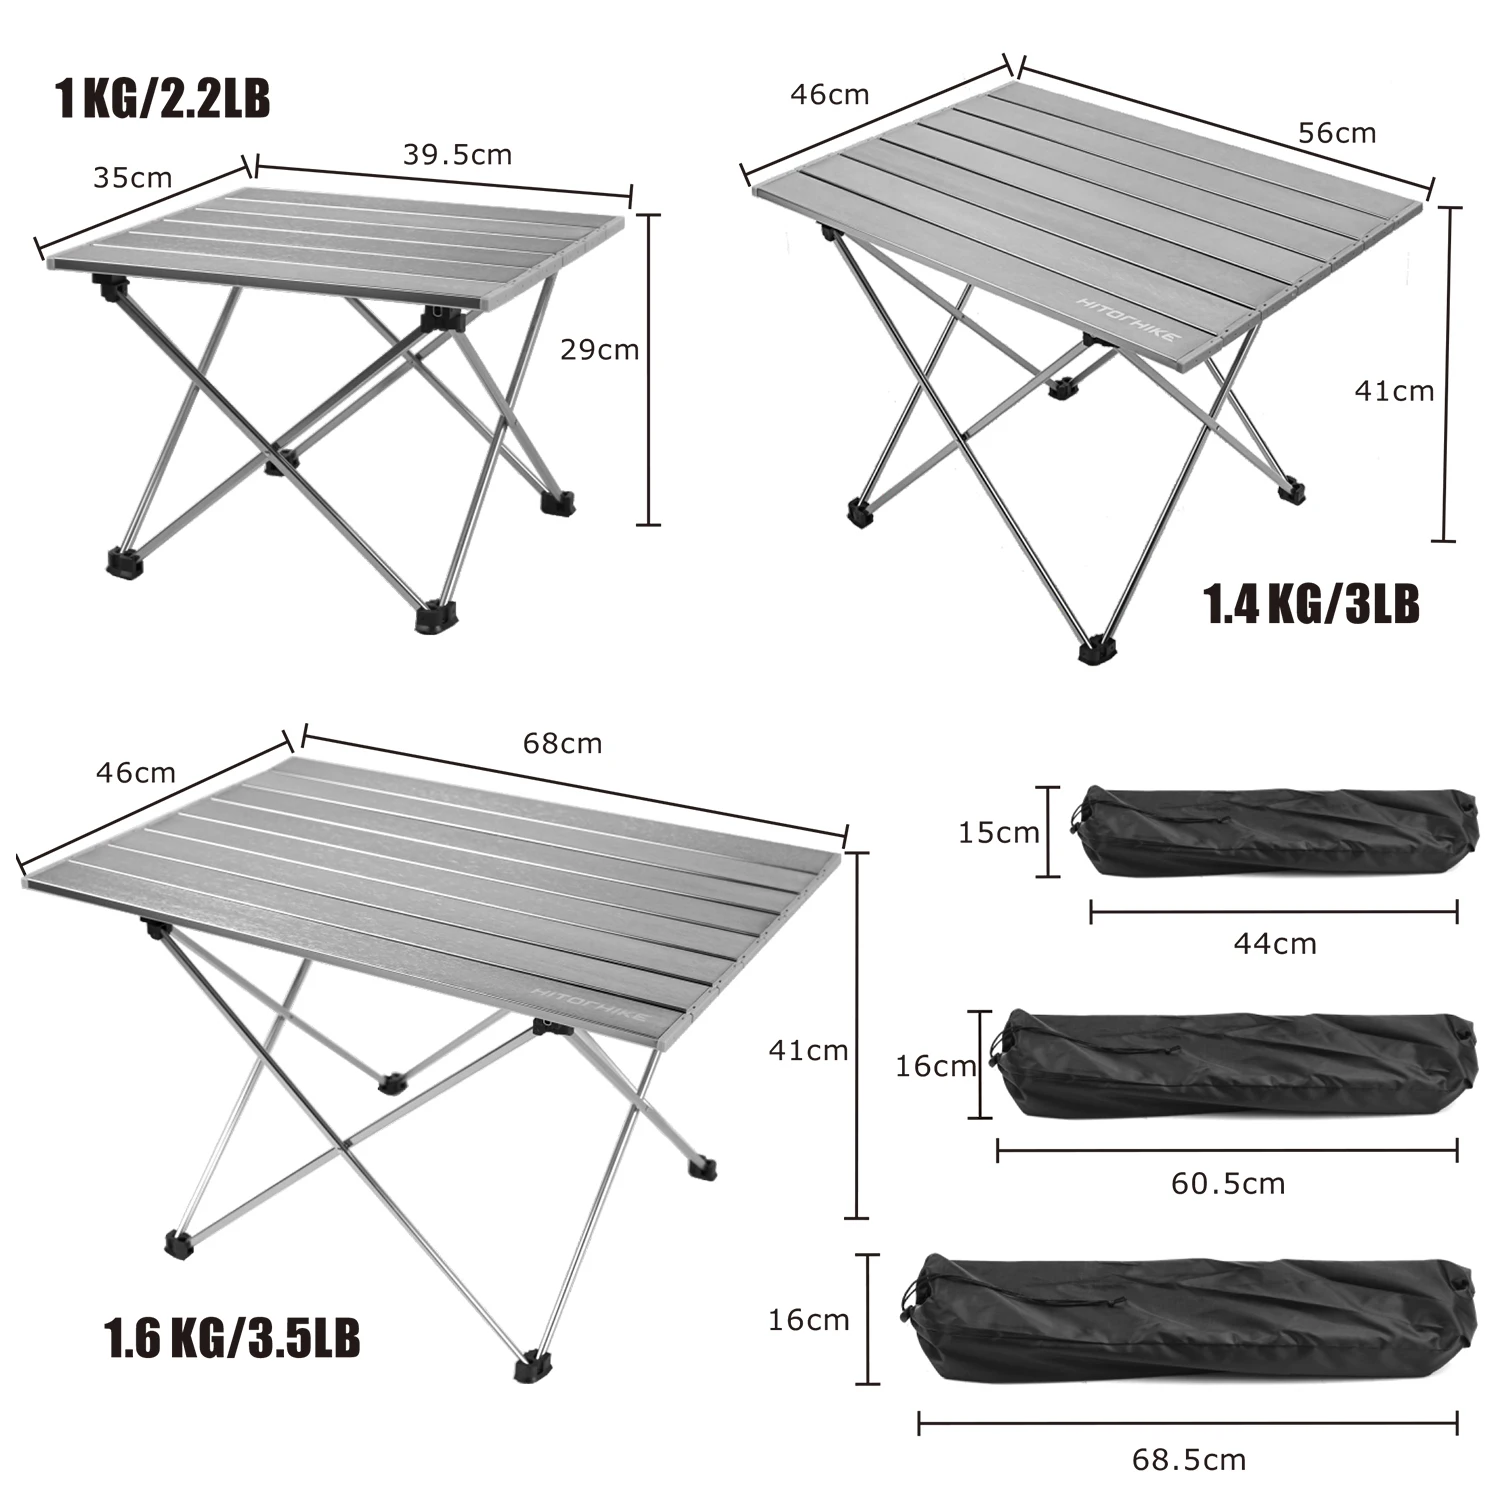 
Hitorhike lightweight outdoor folding aluminium tables camping picnic tables foldable easy to carry 